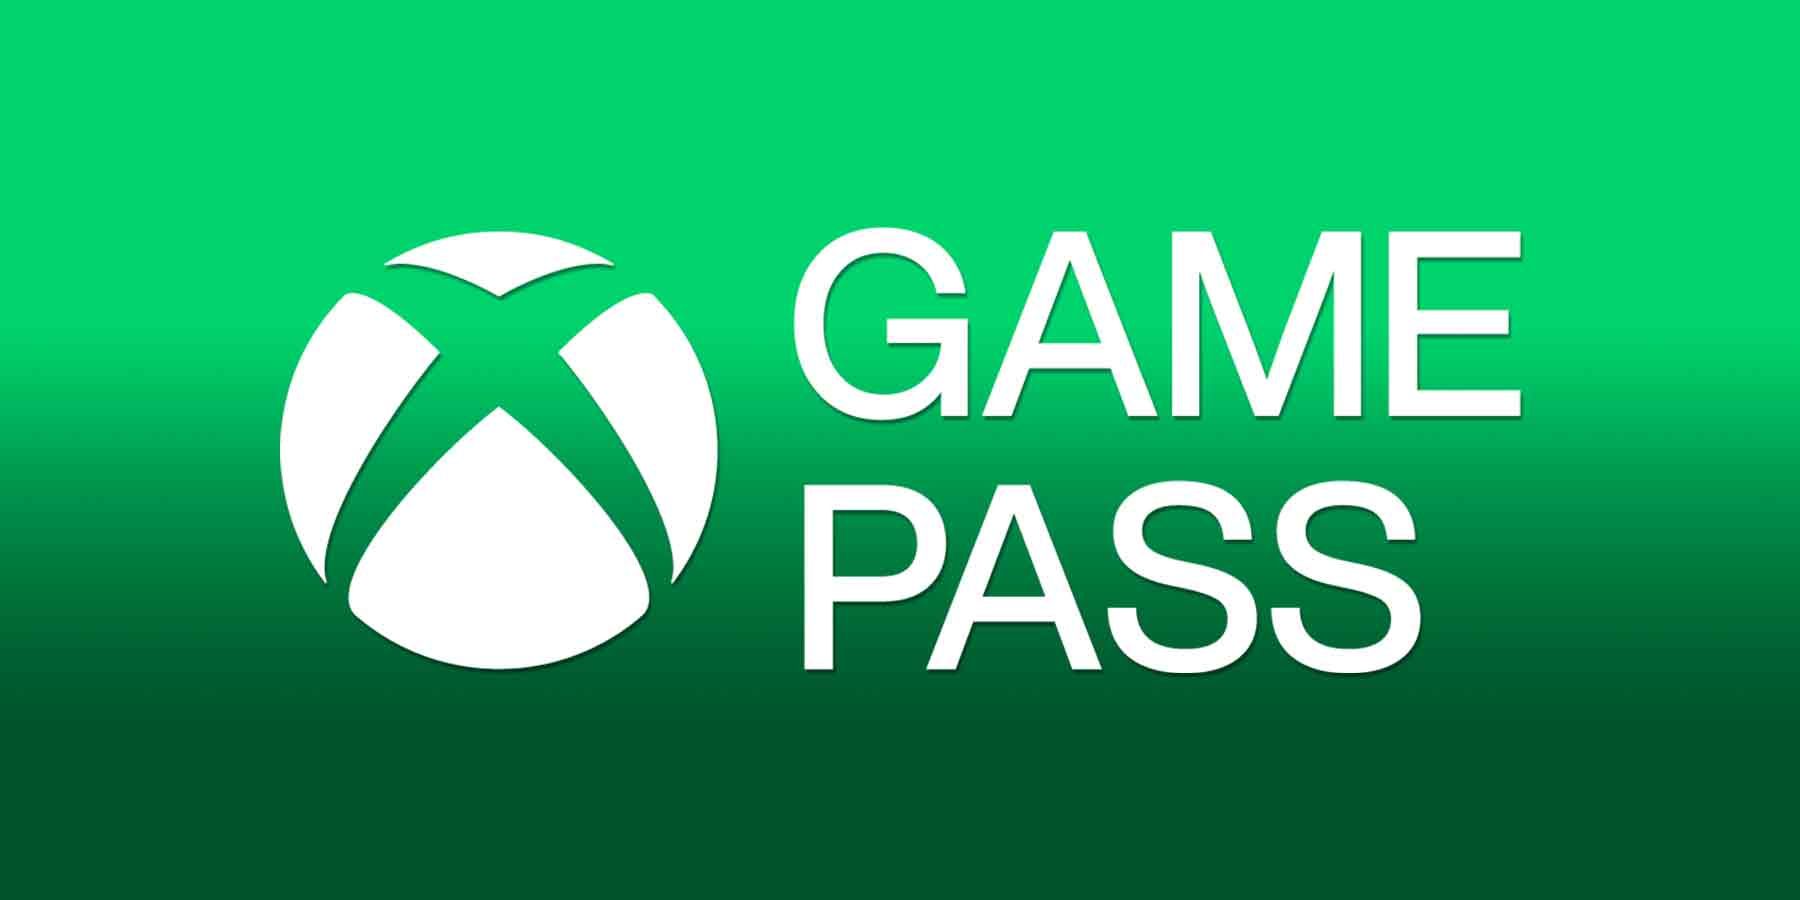 Xbox Game Pass abridged logo on simple green gradient background